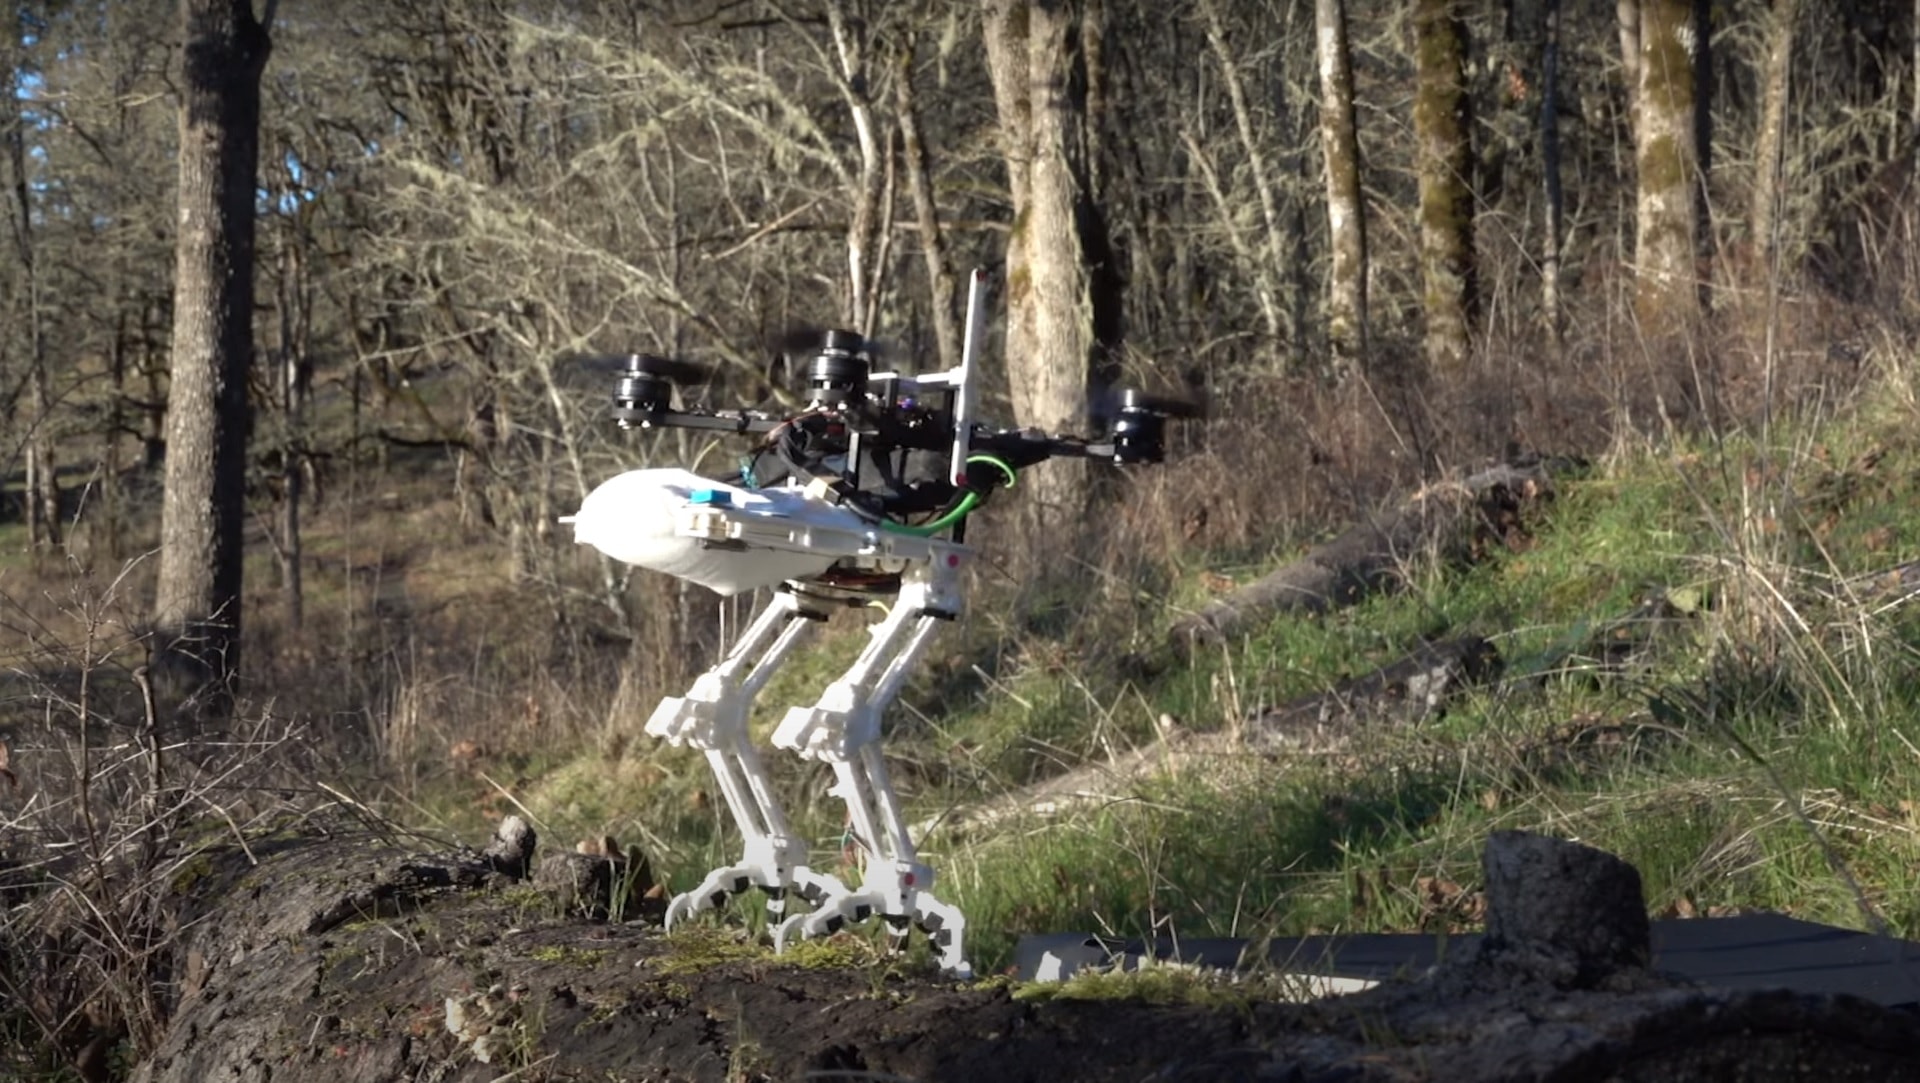 SNAG Bird-Robot Is a Motorized Falcon With Claws and Sensors, Can Be  Attached to Drones - autoevolution